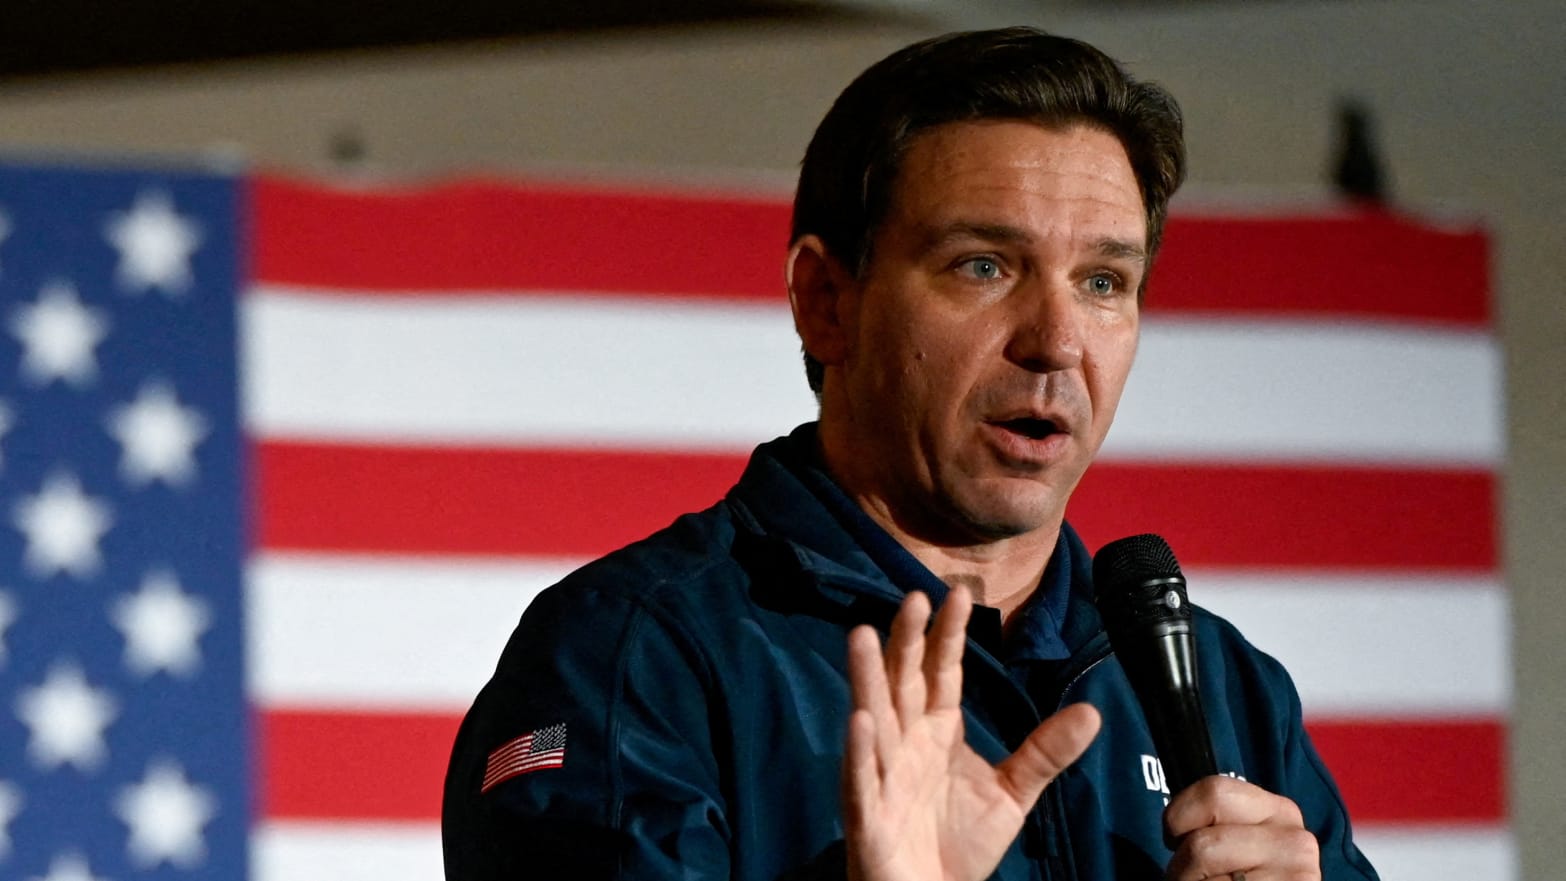 Ron DeSantis gestures as he speaks at a campaign event at The Thunderdome in Newton, Iowa